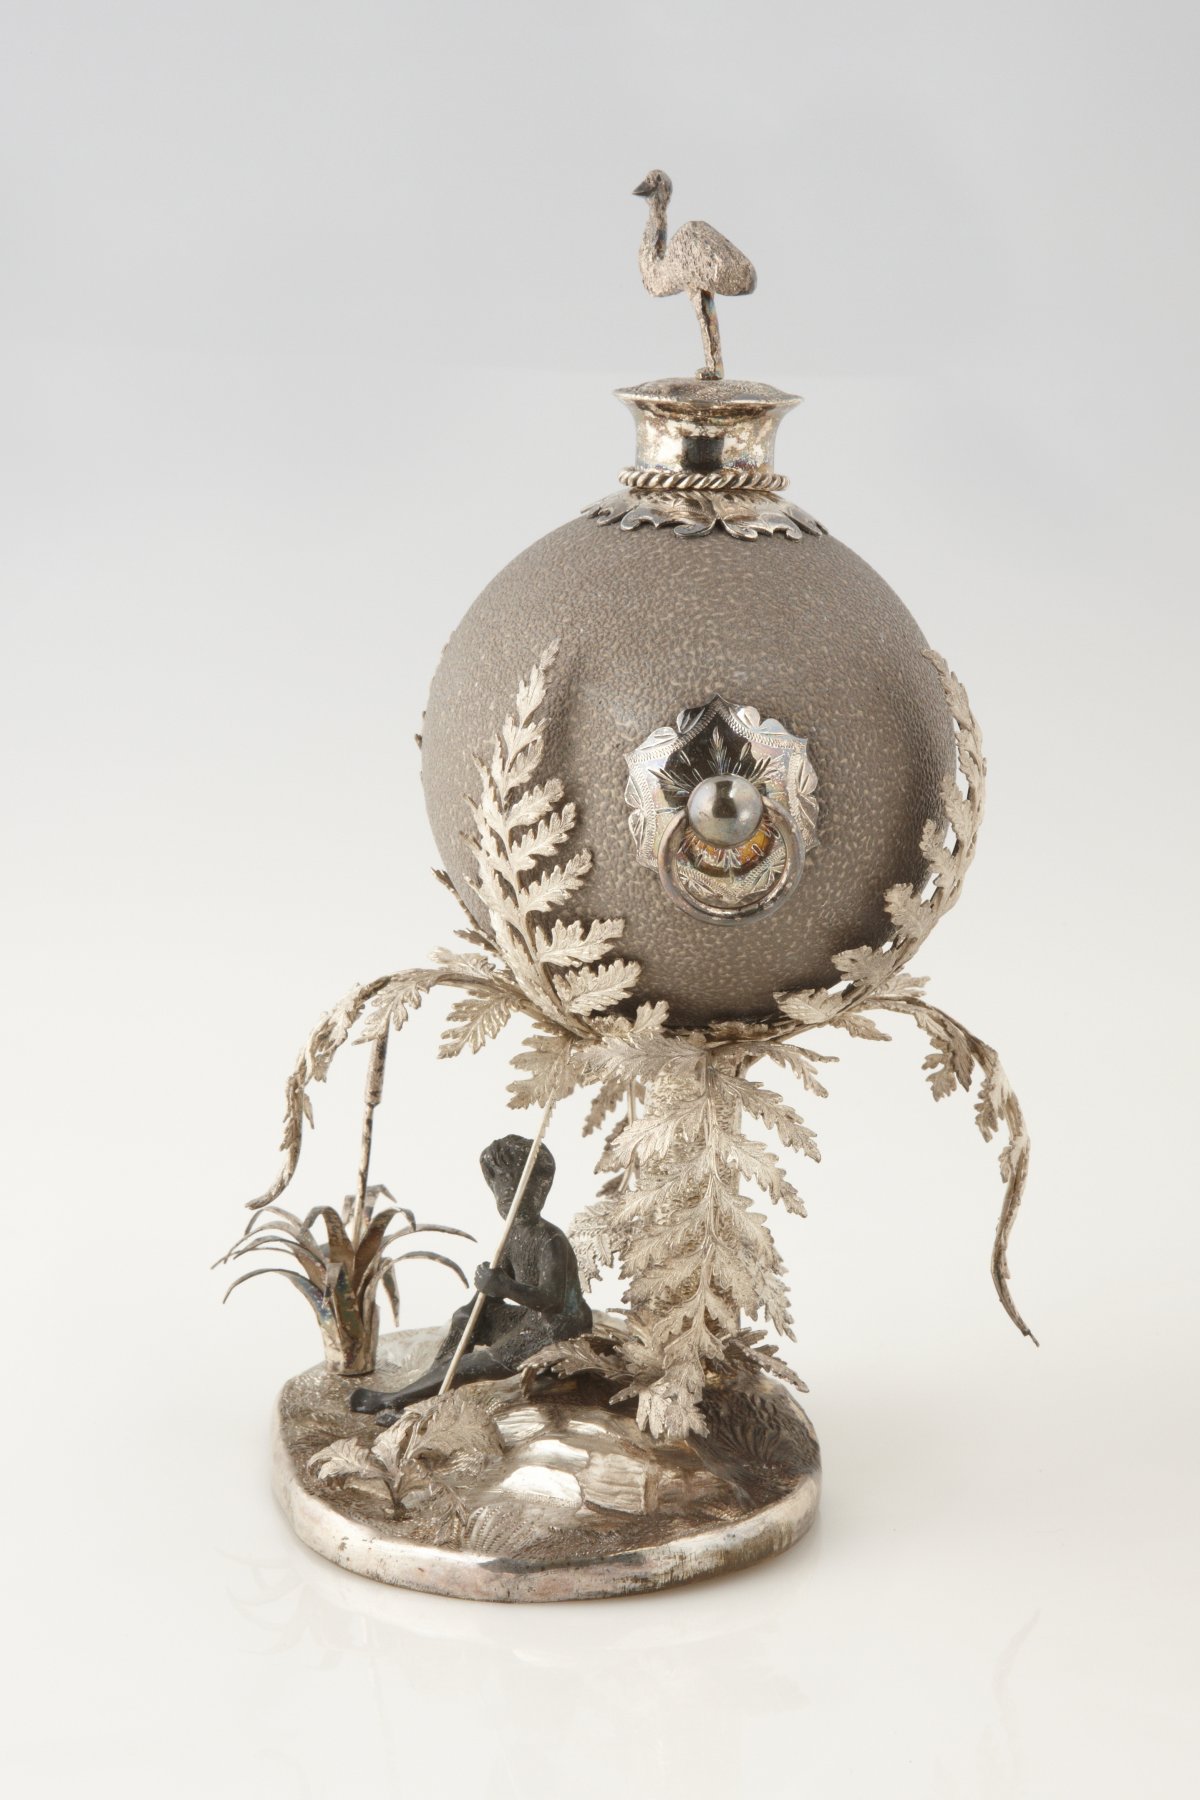 A sculpture of an emu egg on Silver-plate Stand. Underneath an Aboriginal man sits with spear. Surrounding the figure are large fern fronds and rocks.860s